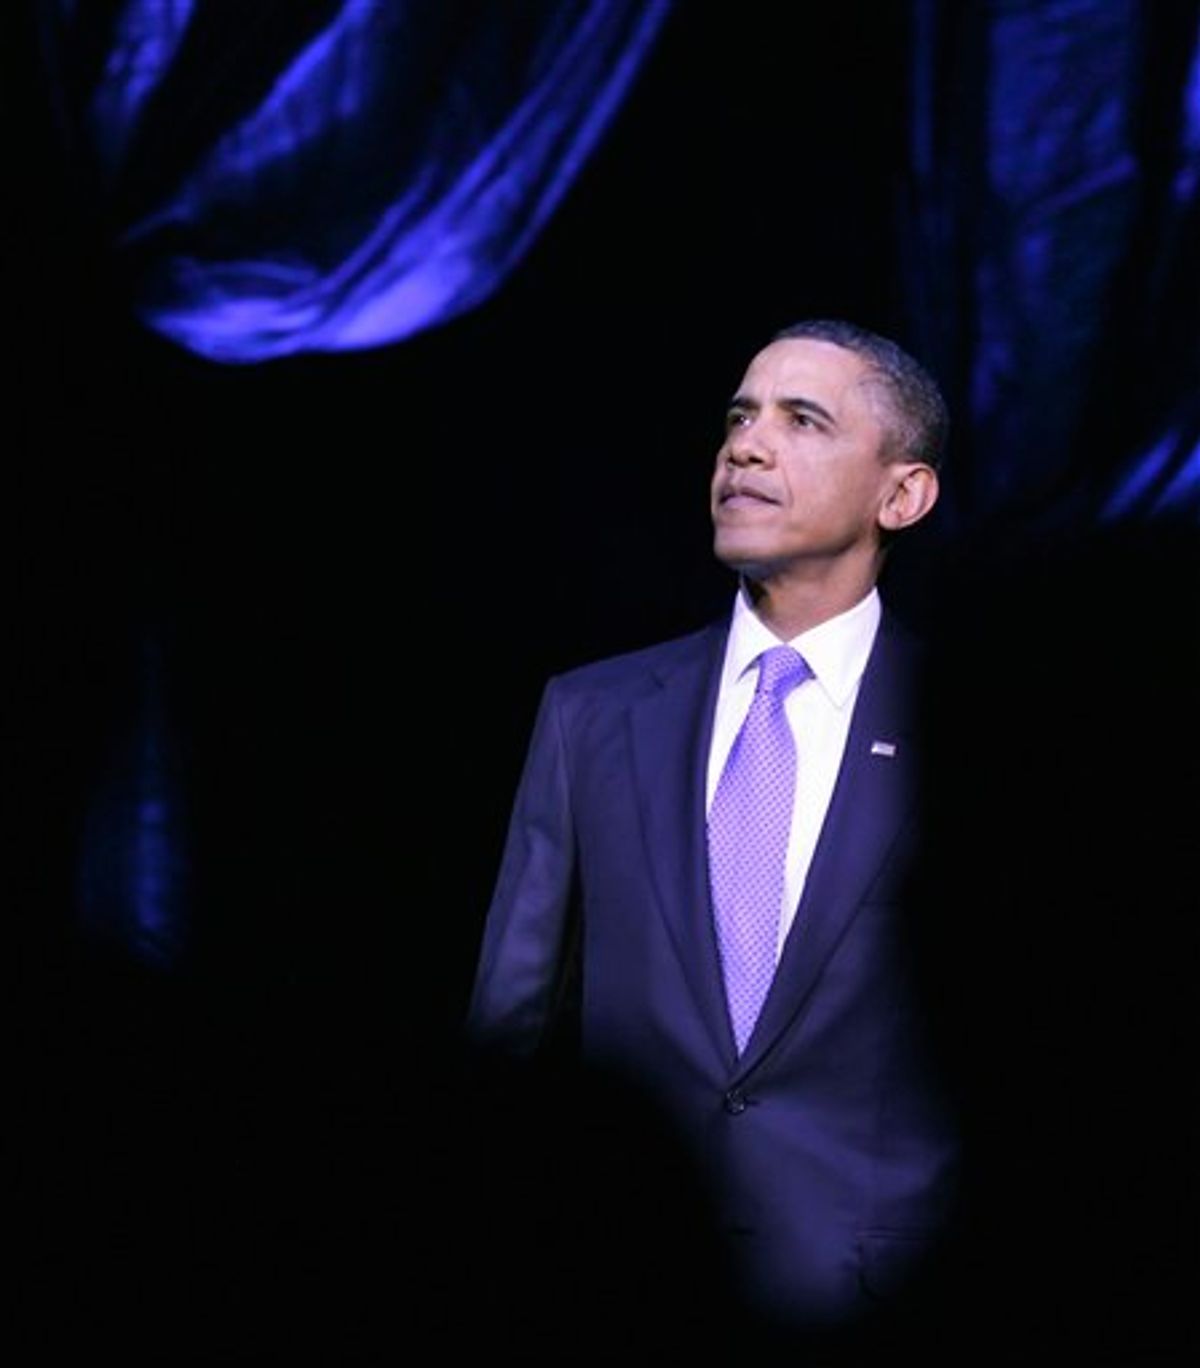 President Barack Obama looks up to the audience as he arrives at an event to celebrate the 50th Anniversary of John F. Kennedy's  inauguration address, Thursday, Jan. 20, 2011, at the Kennedy Center in Washington.   (AP Photo/Carolyn Kaster) (AP)